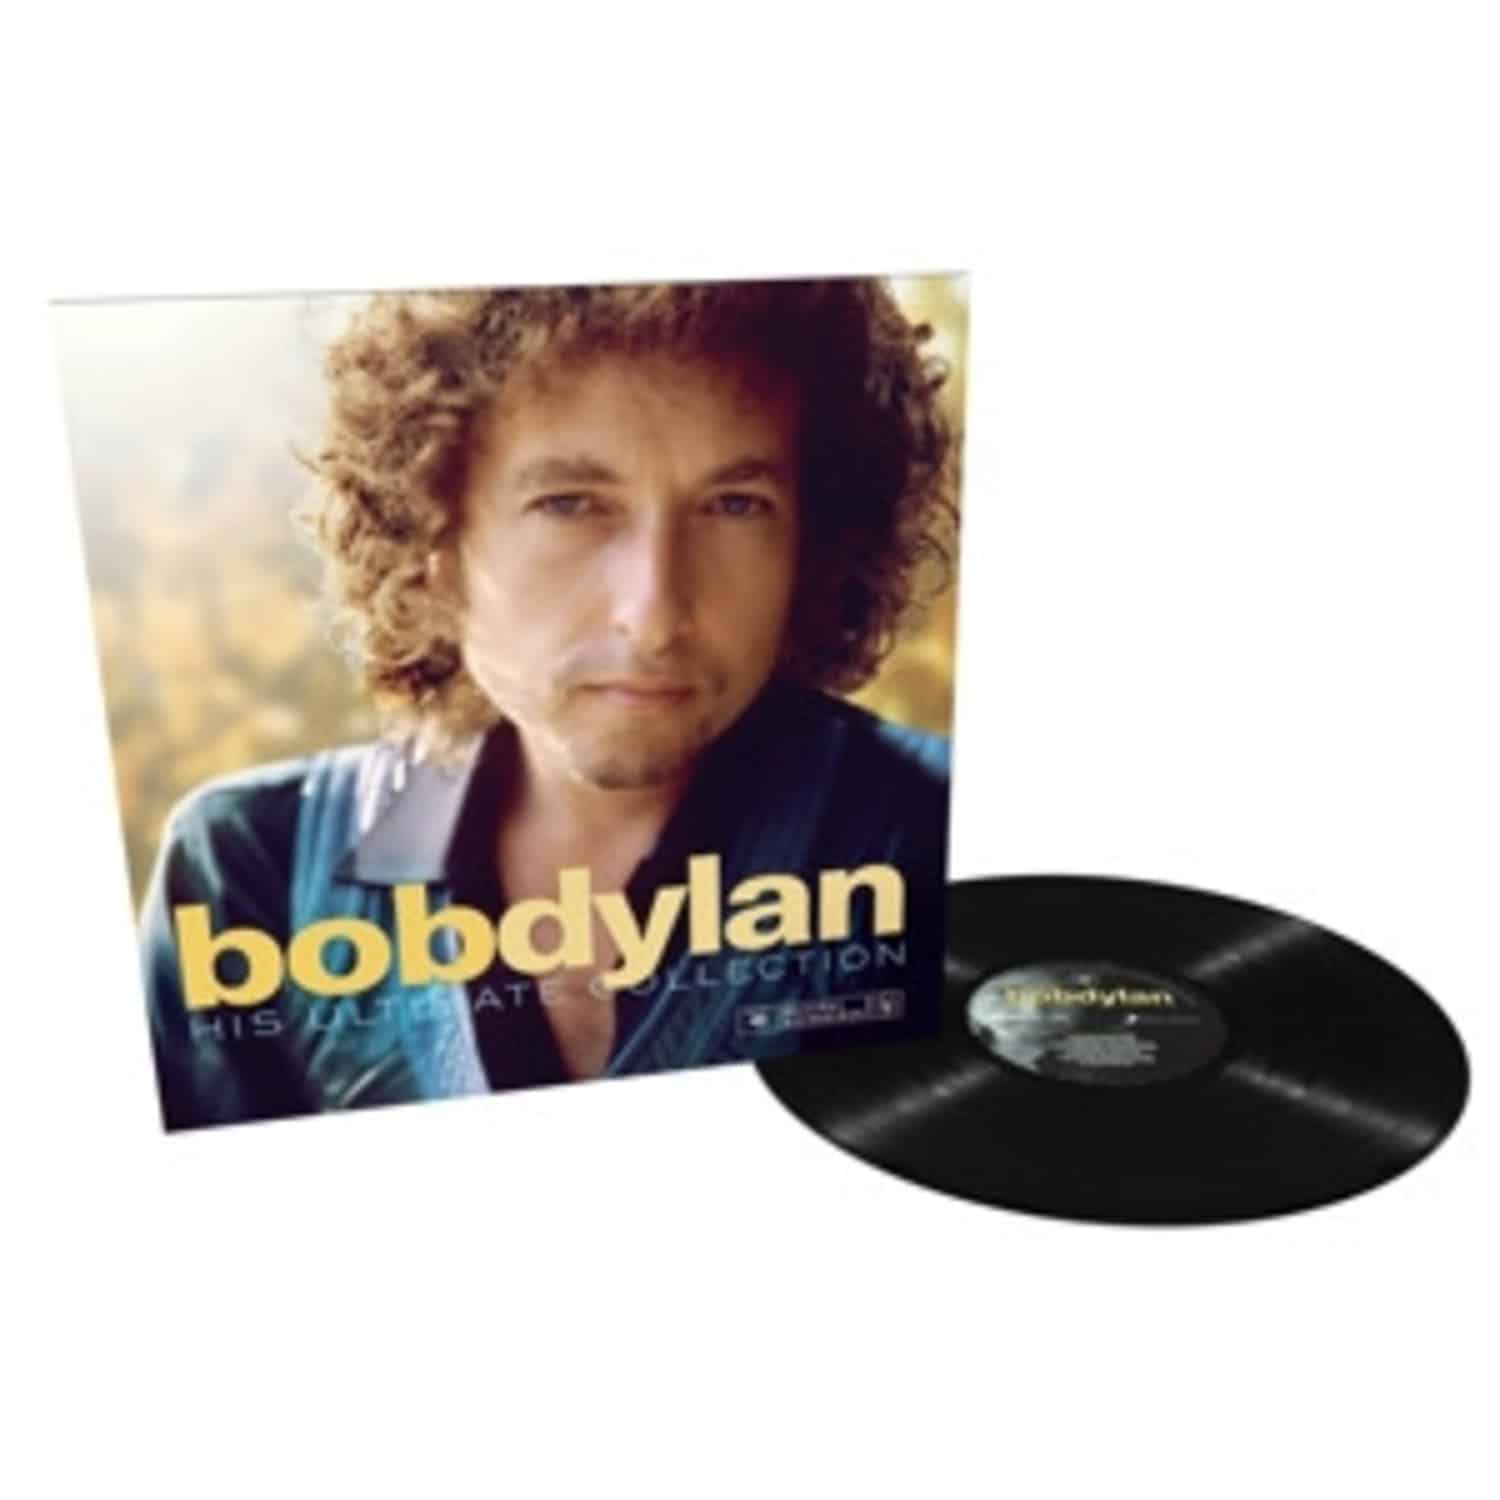 Bob Dylan - HIS ULTIMATE COLLECTION